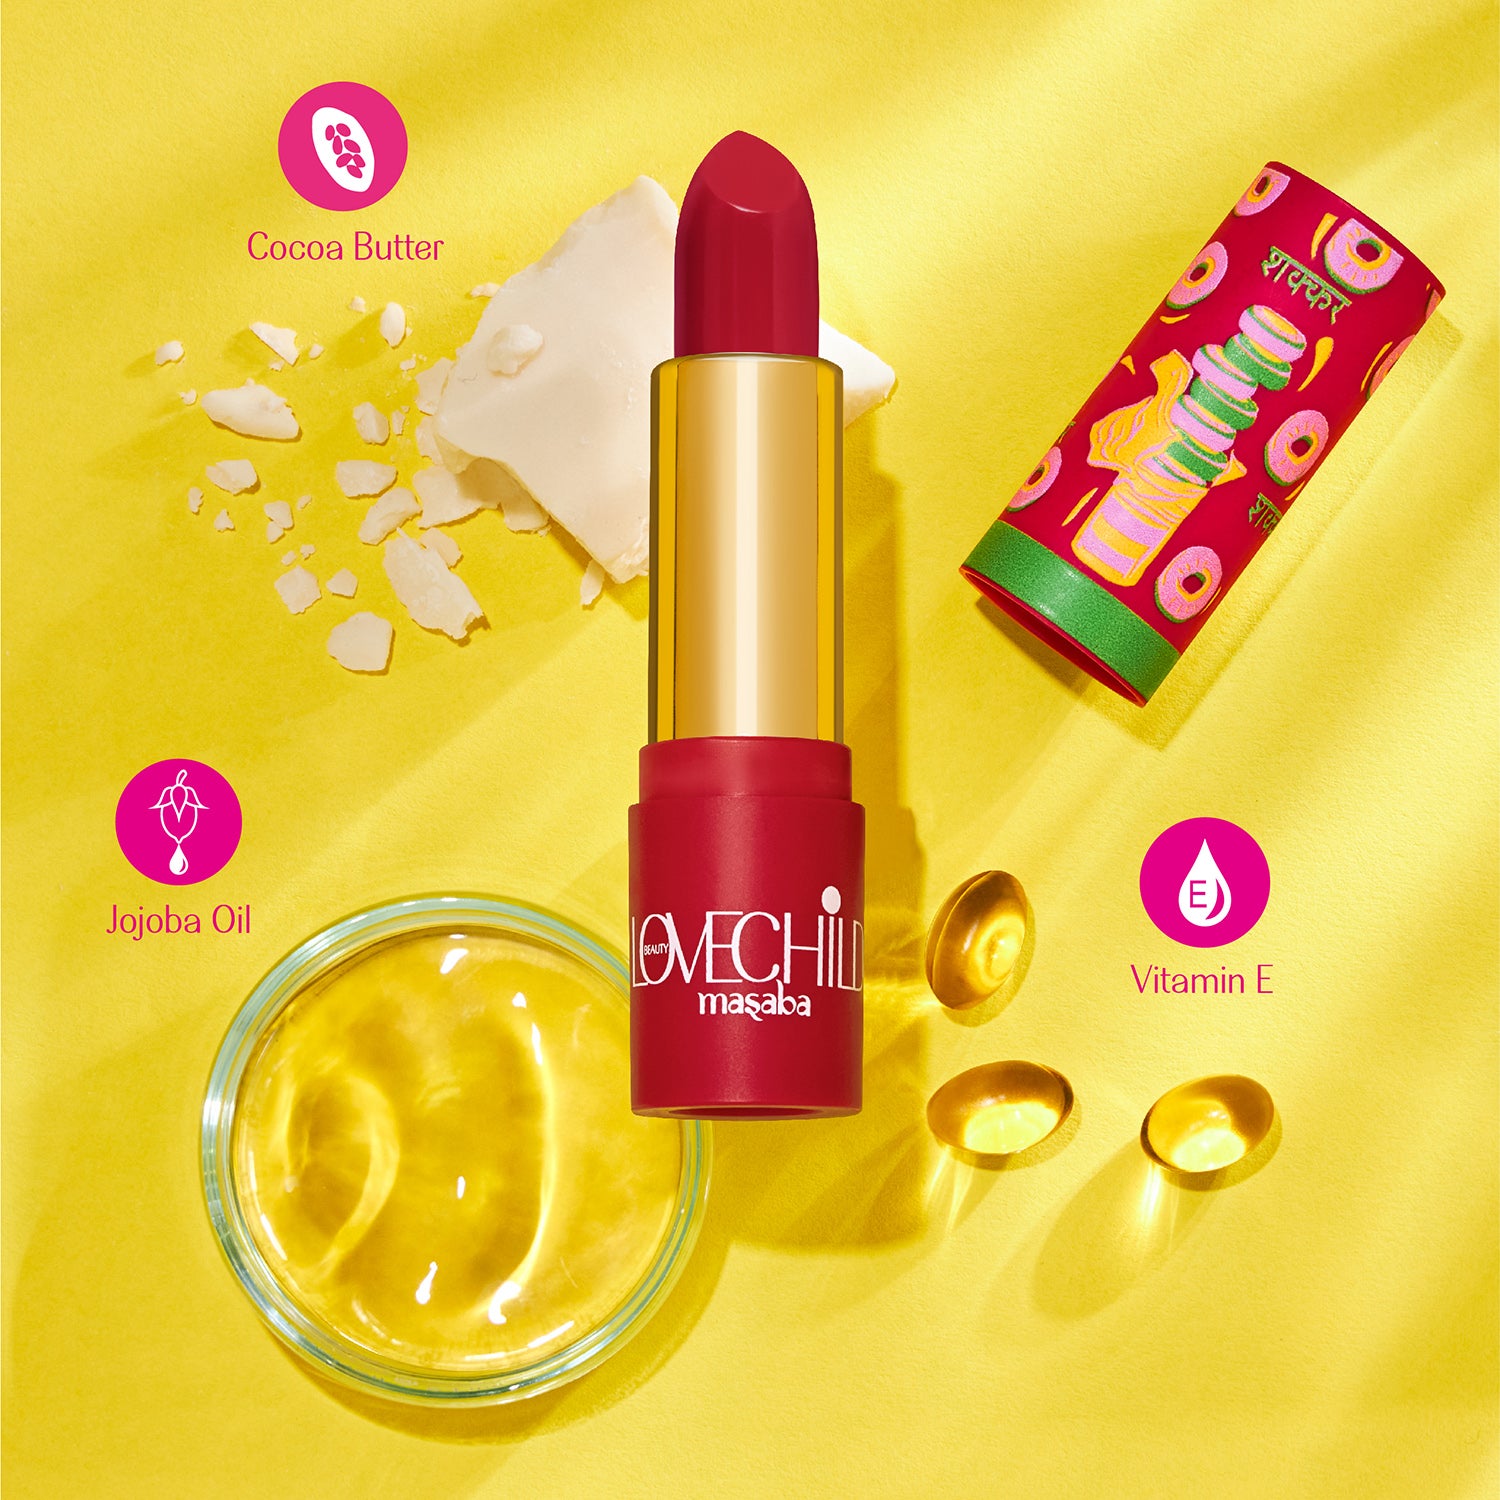 LoveChild Masaba - For the Kid in You! - 10 Twisted - Luxe Matte Lipstick